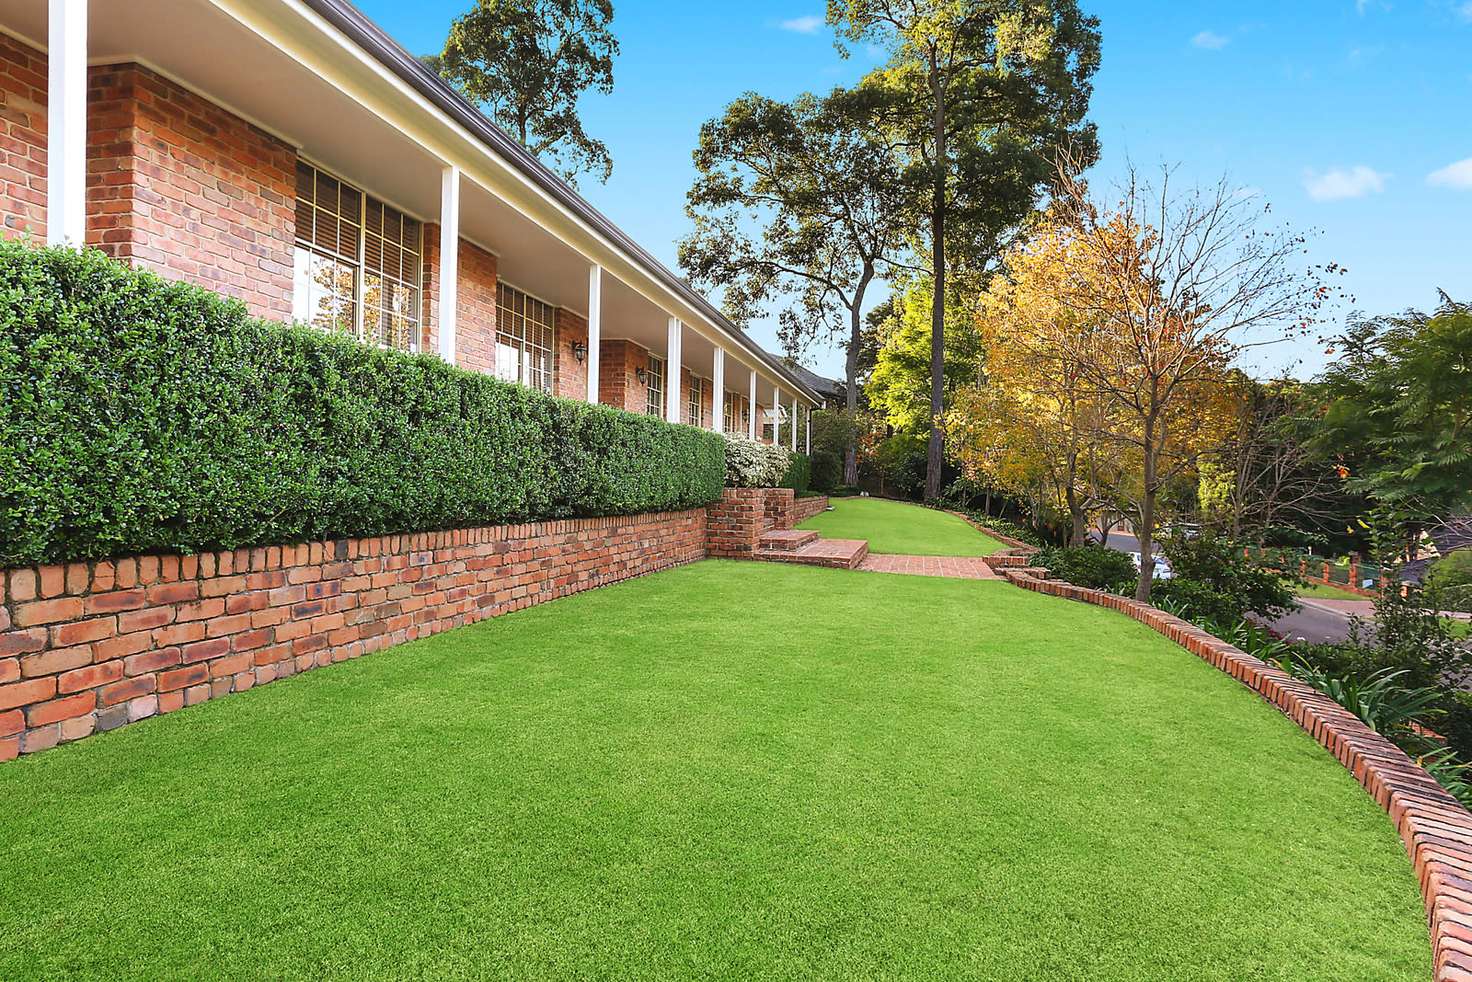 Main view of Homely house listing, 3 Ferngreen Way, Castle Hill NSW 2154